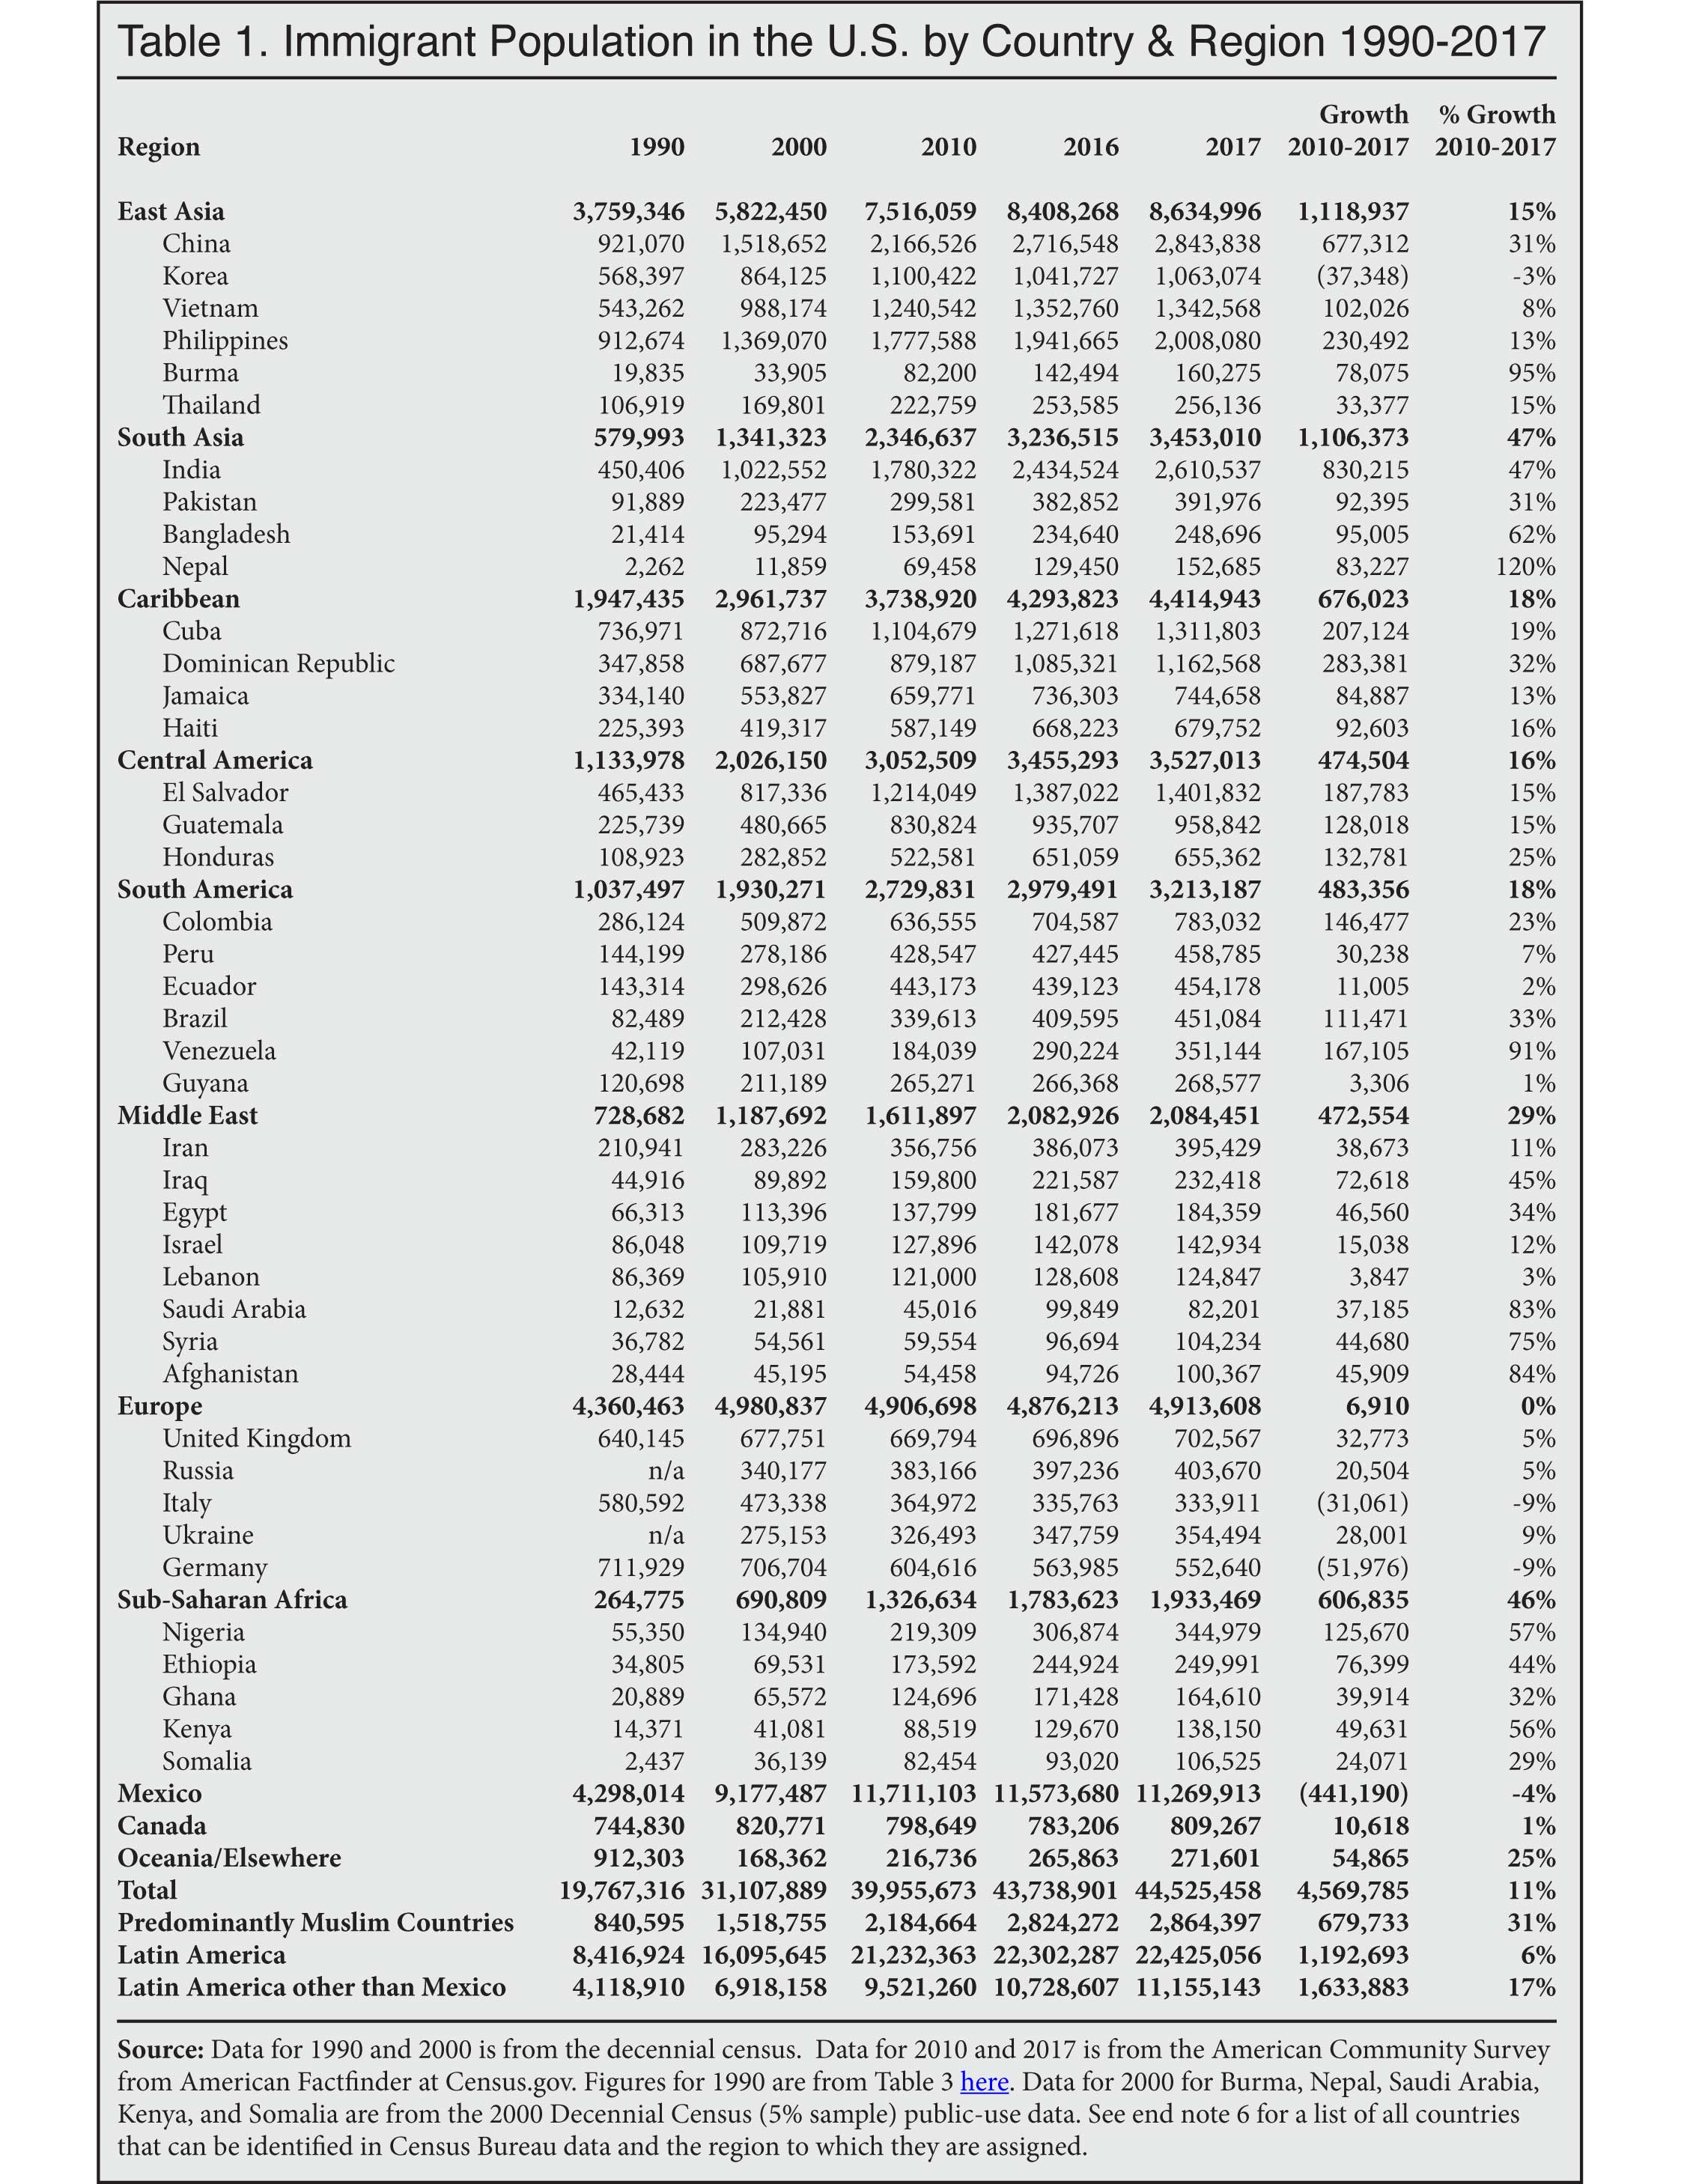 Table: Immigrant Population in the US by Country and Region 1990-2017